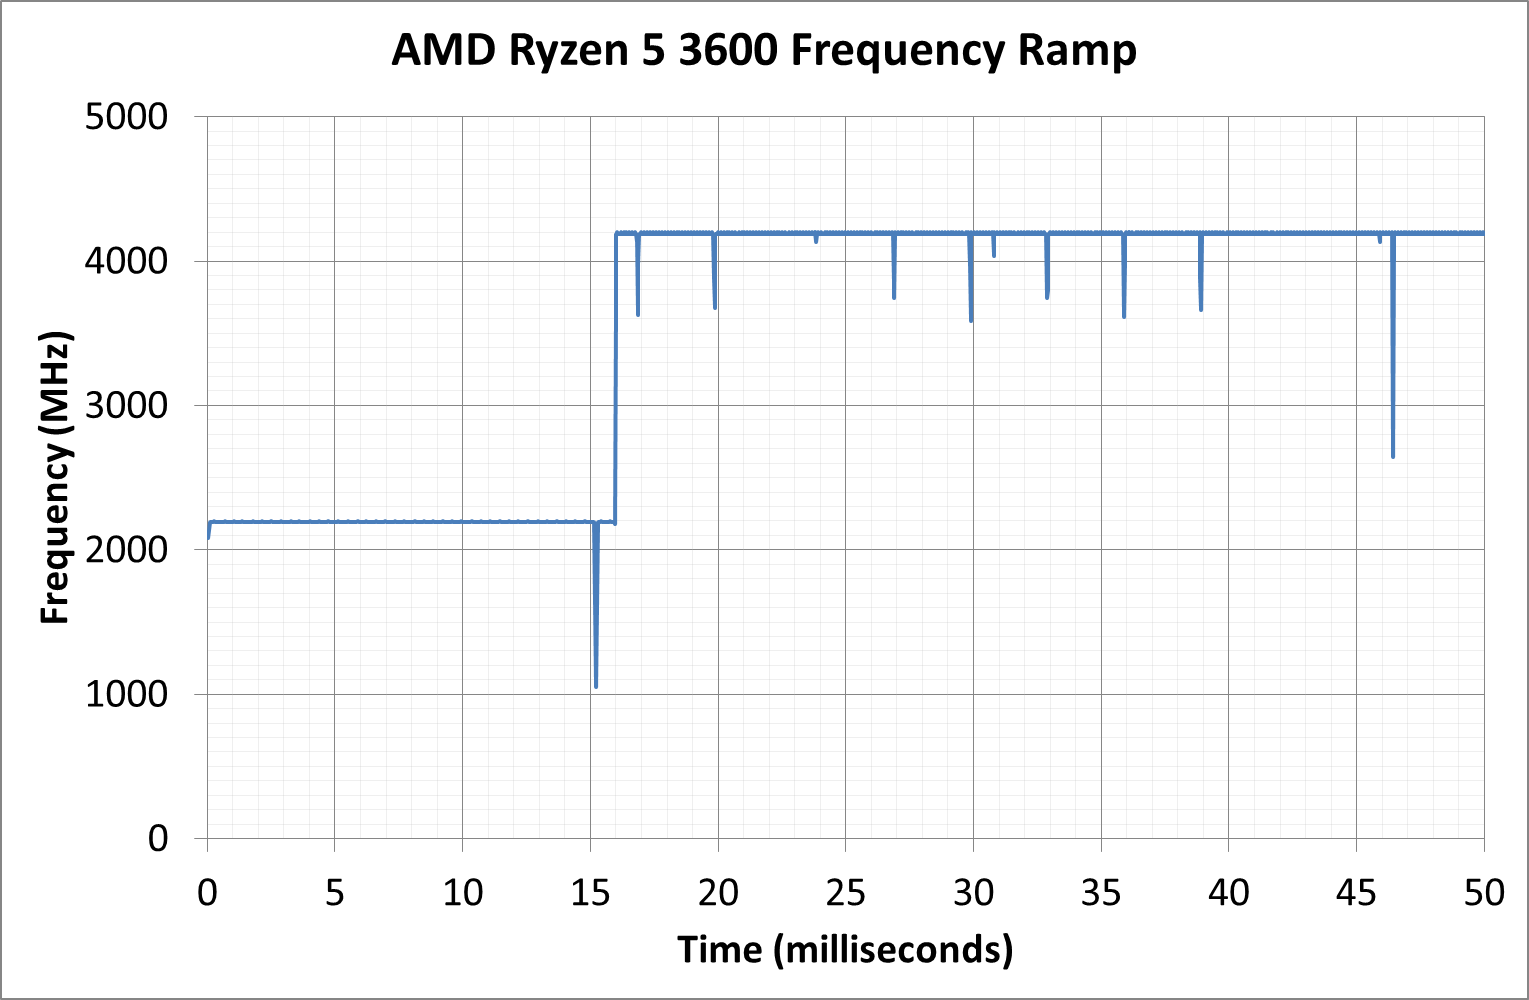 Internationale Kenia Schadelijk Turbo, Power, and Latency - AMD Ryzen 5 3600 Review: Why Is This Amazon's  Best Selling CPU?